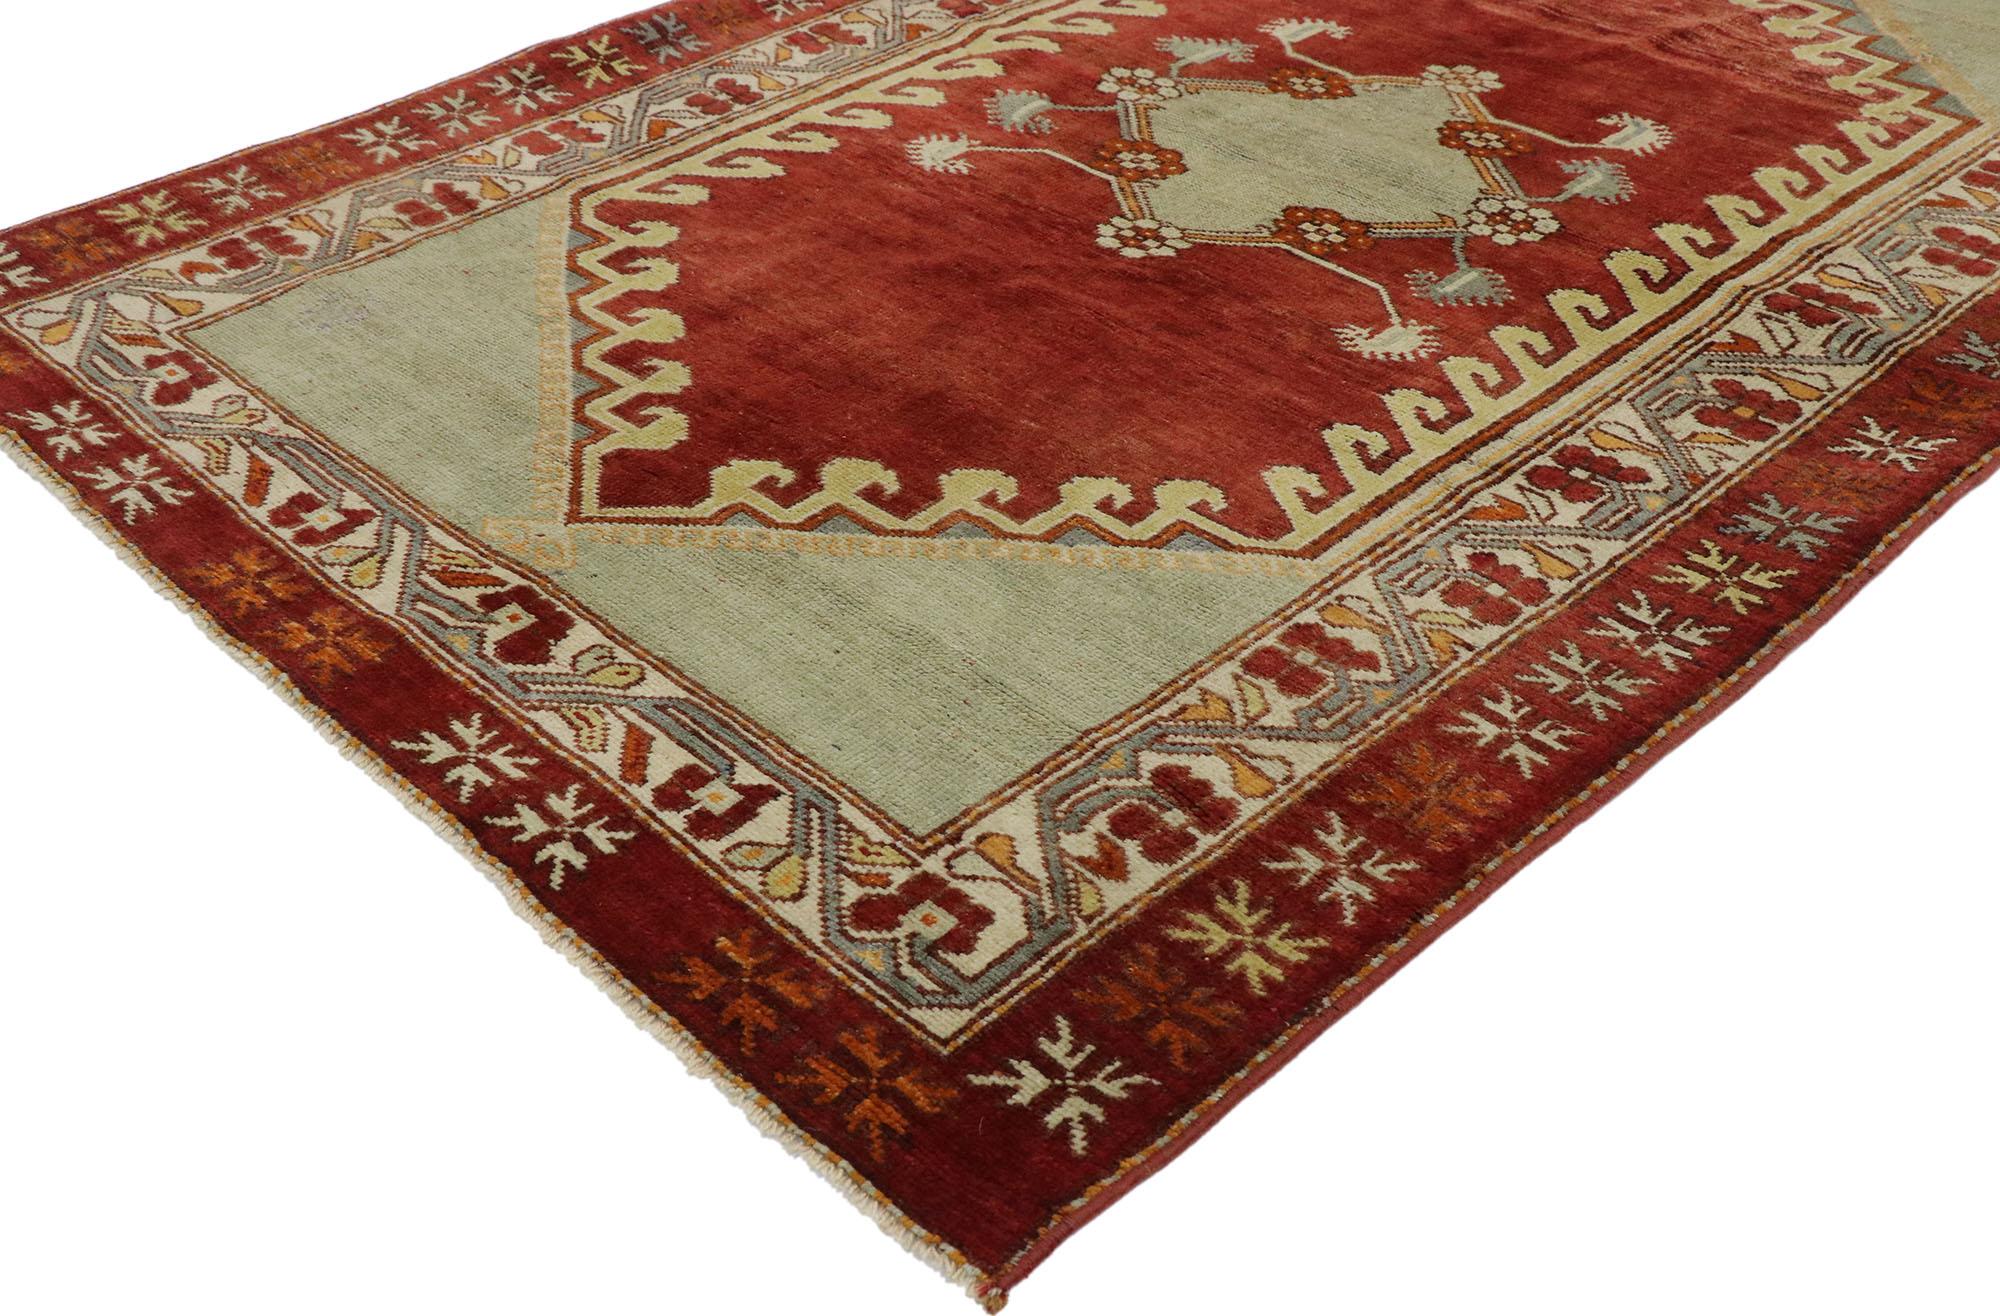 53394, vintage Turkish Oushak rug with Venetian style. Venetian style is a stunning amalgam of Islamic and Italian furnishings and design elements. In this hand knotted wool vintage Turkish Oushak rug we see both cultures on display. Sumptuous like